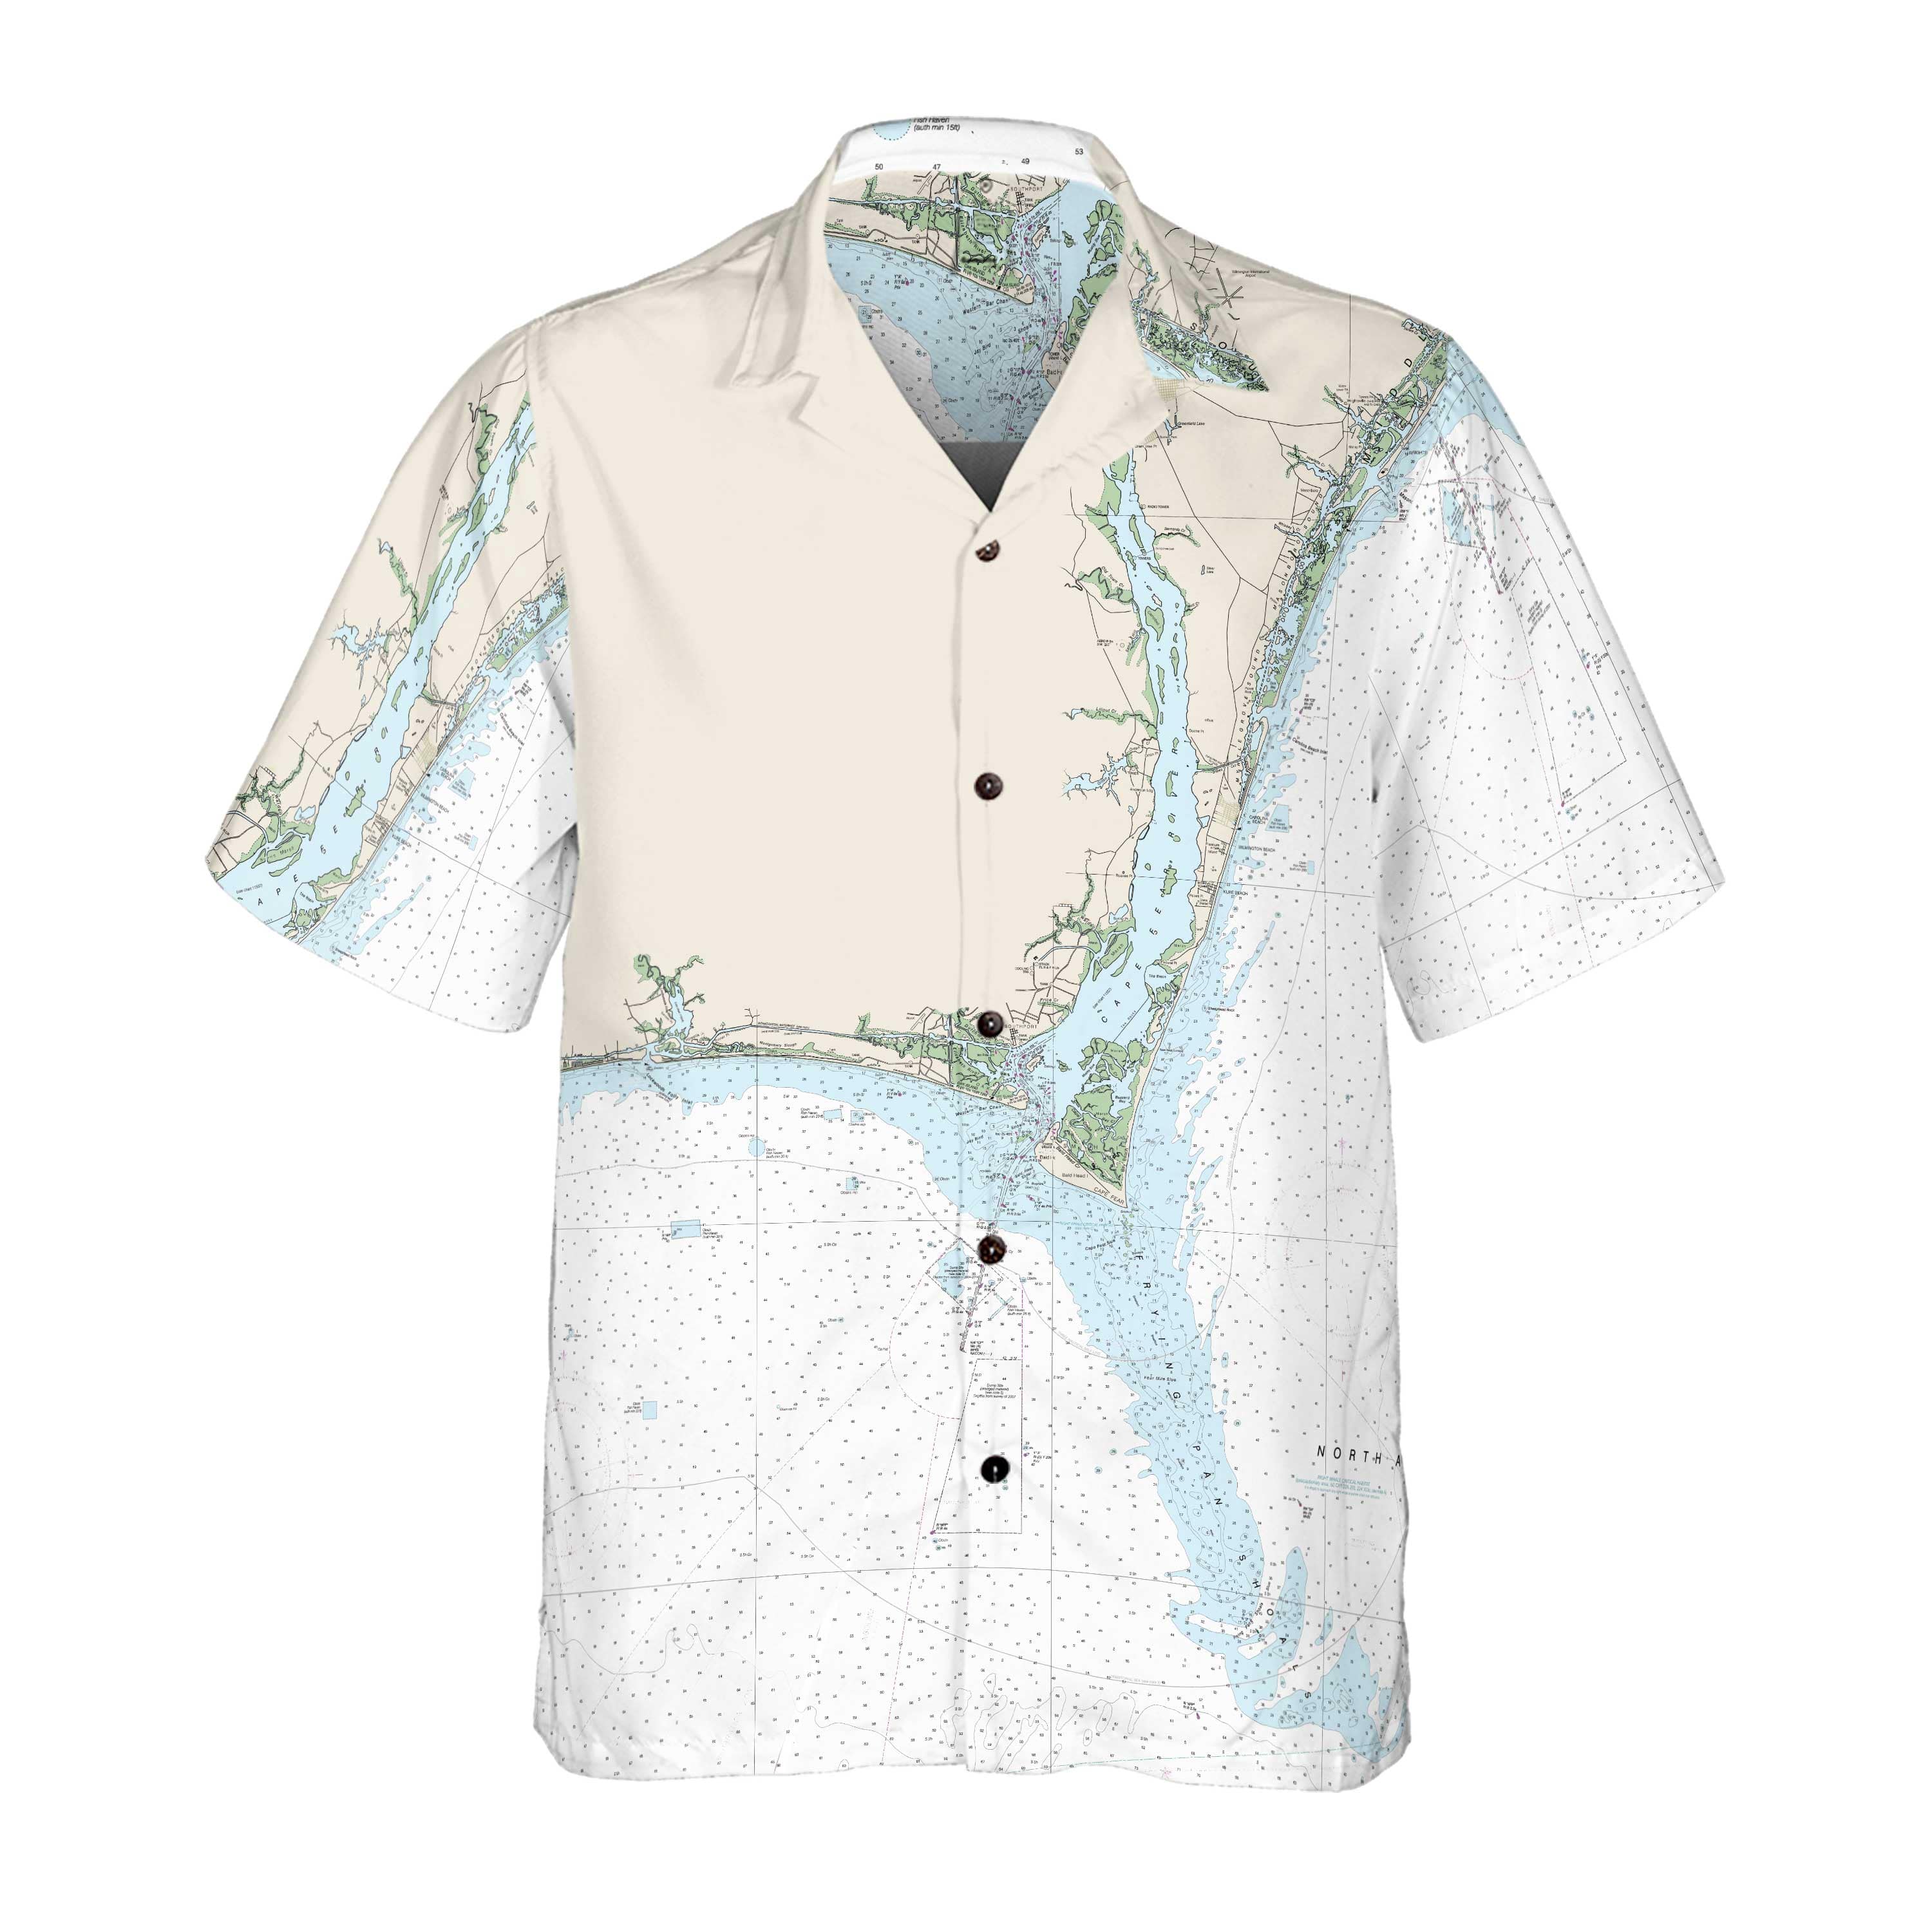 The Cape Fear to Little River Coconut Button Camp Shirt